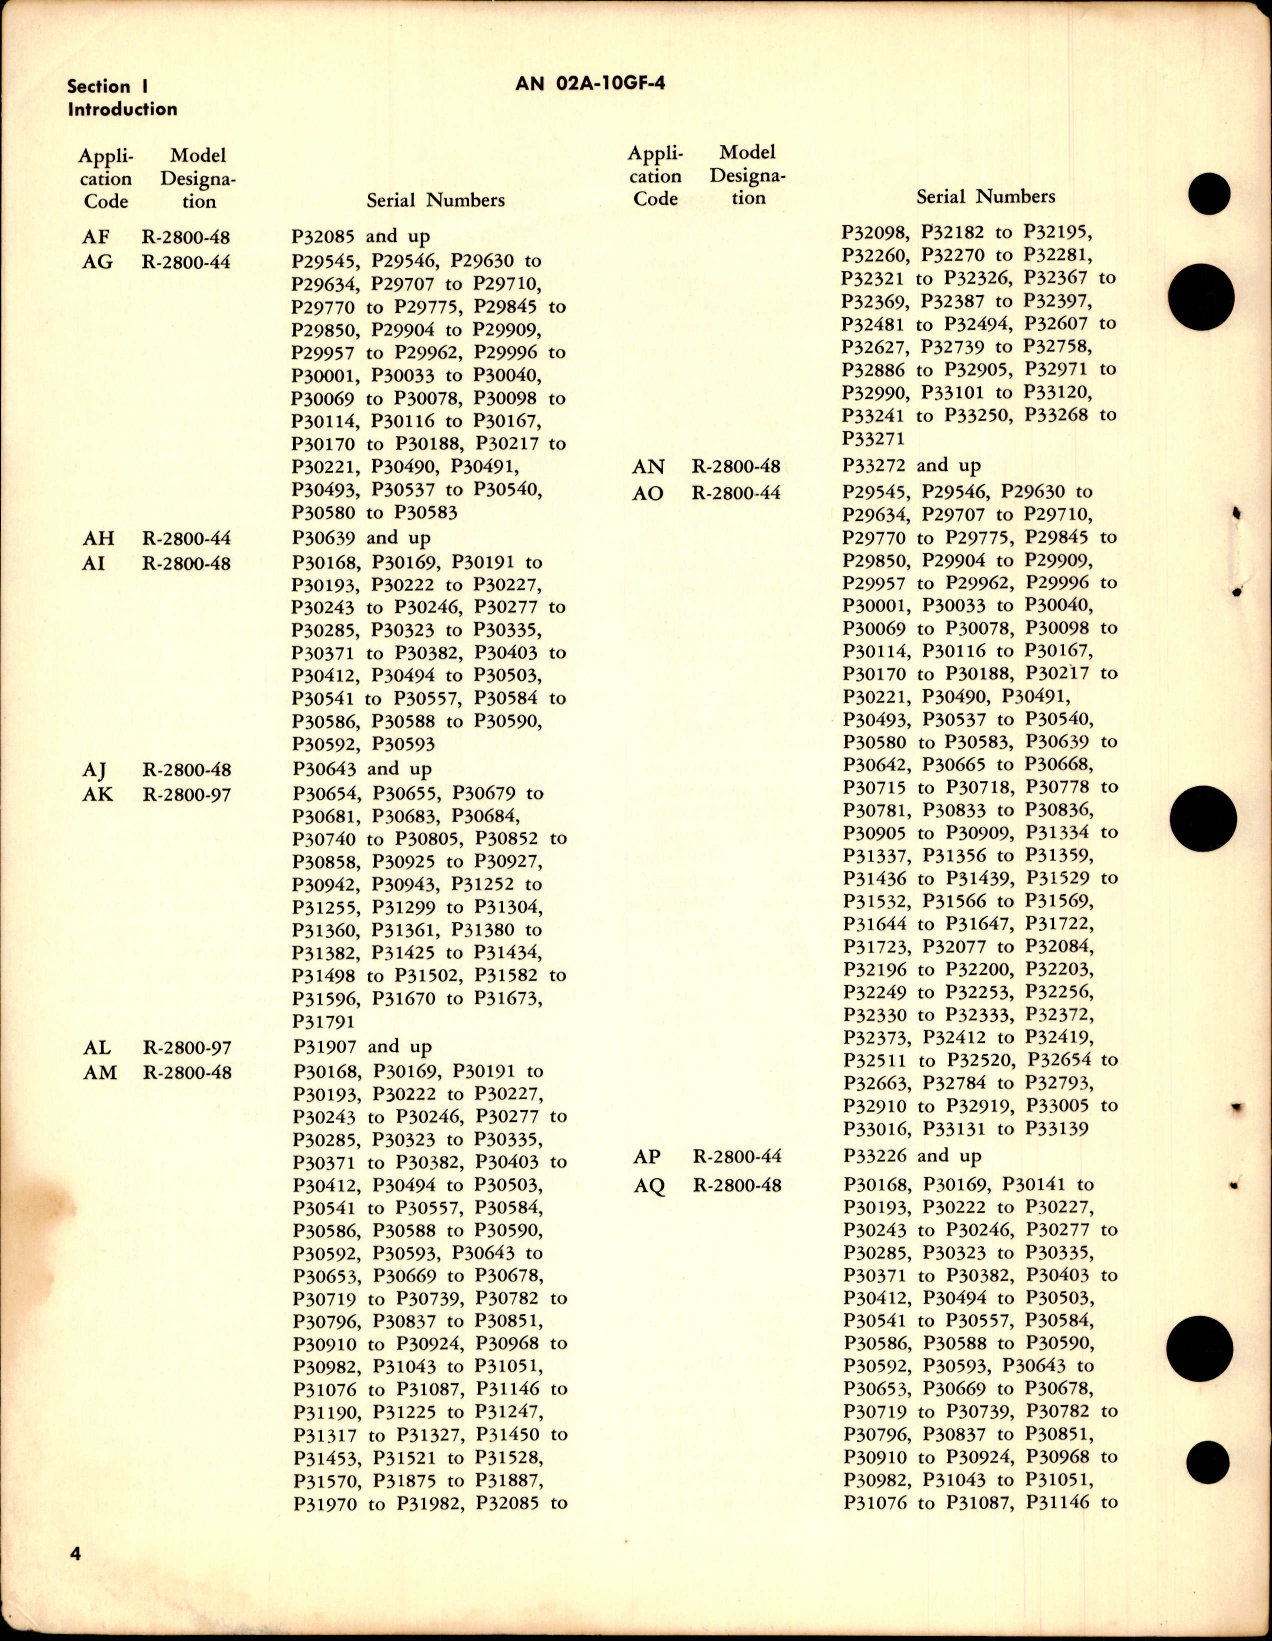 Sample page 8 from AirCorps Library document: Parts Catalog for Models R-2800-44, -48 and -97